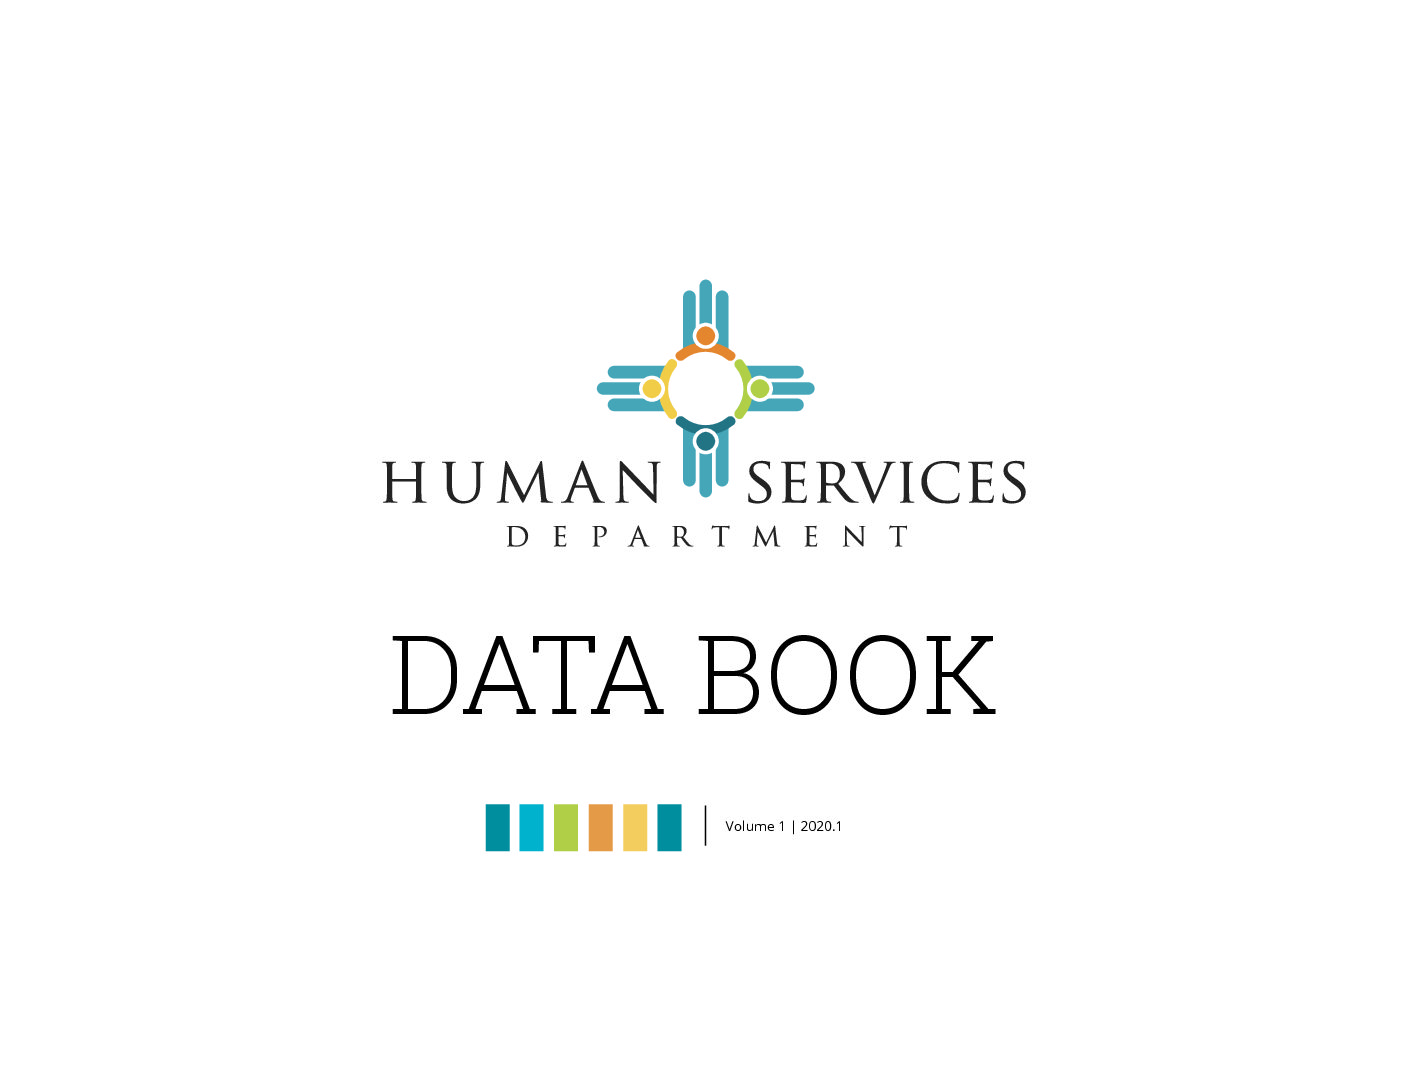 Human Services Department publishes the first of its kind Data Book 2020